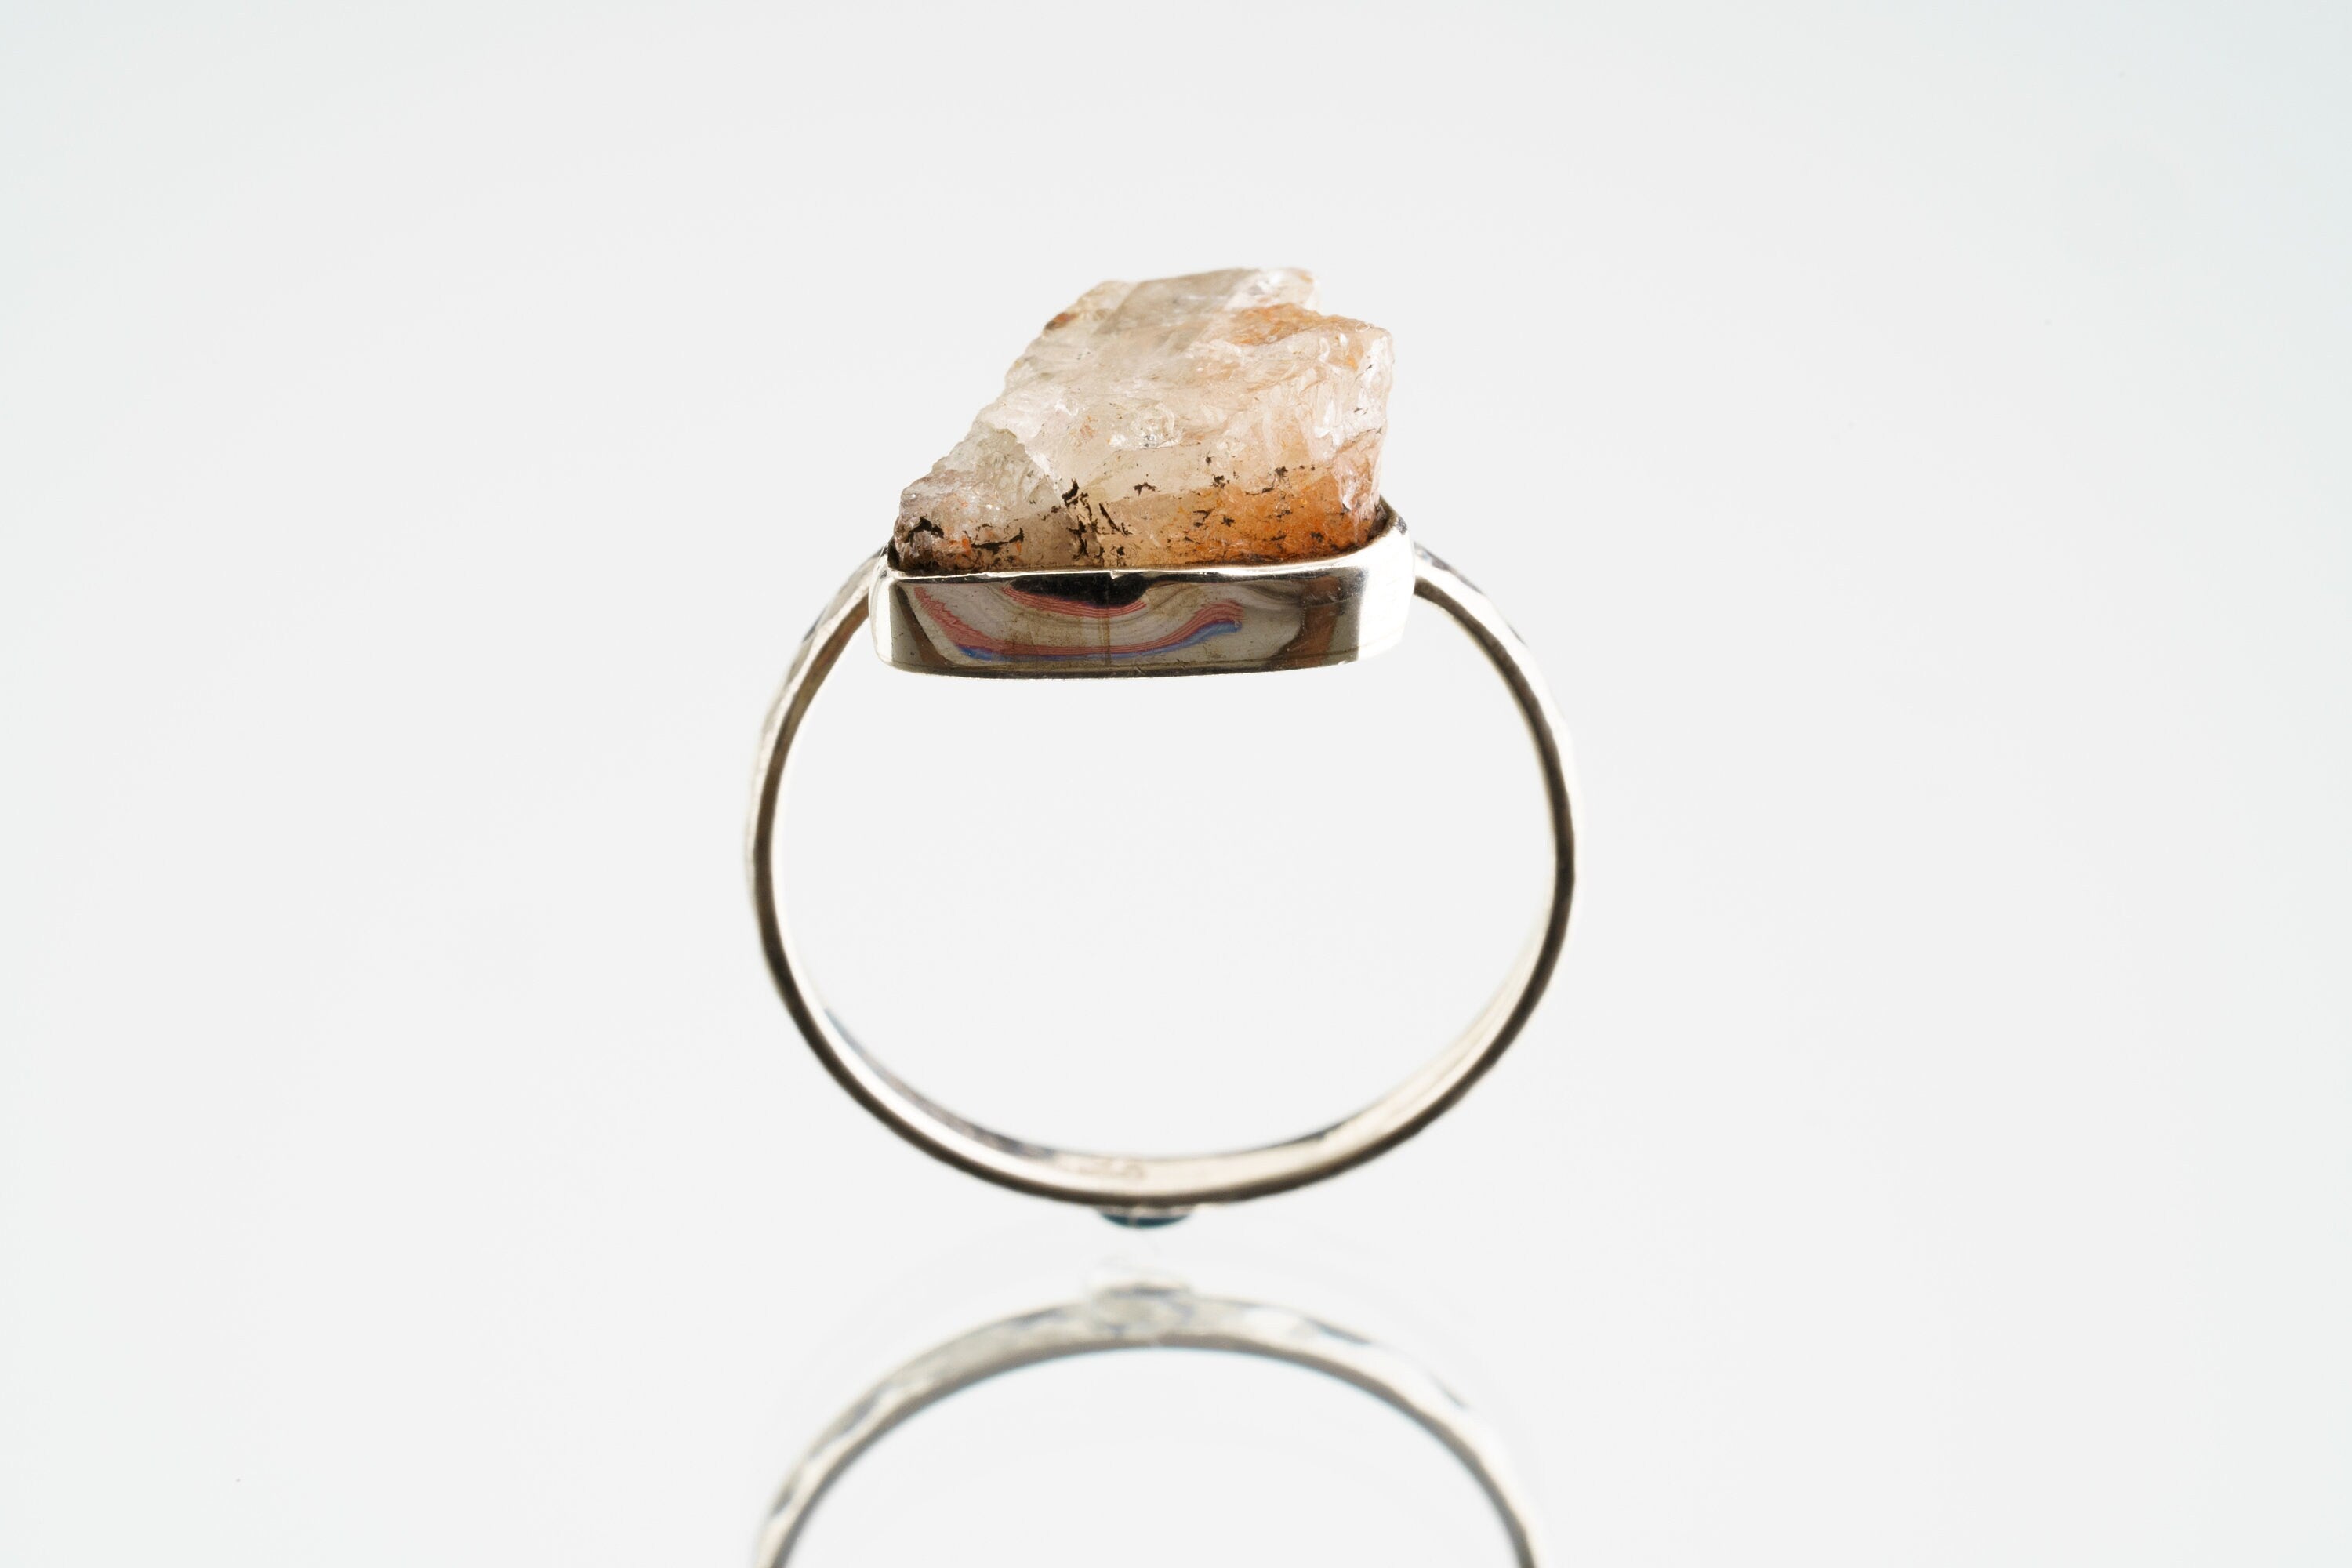 Natural Rough Sunstone - Stack Crystal Ring - Size 7 1/4 US - 925 Sterling Silver - Thin Band Hammer Textured